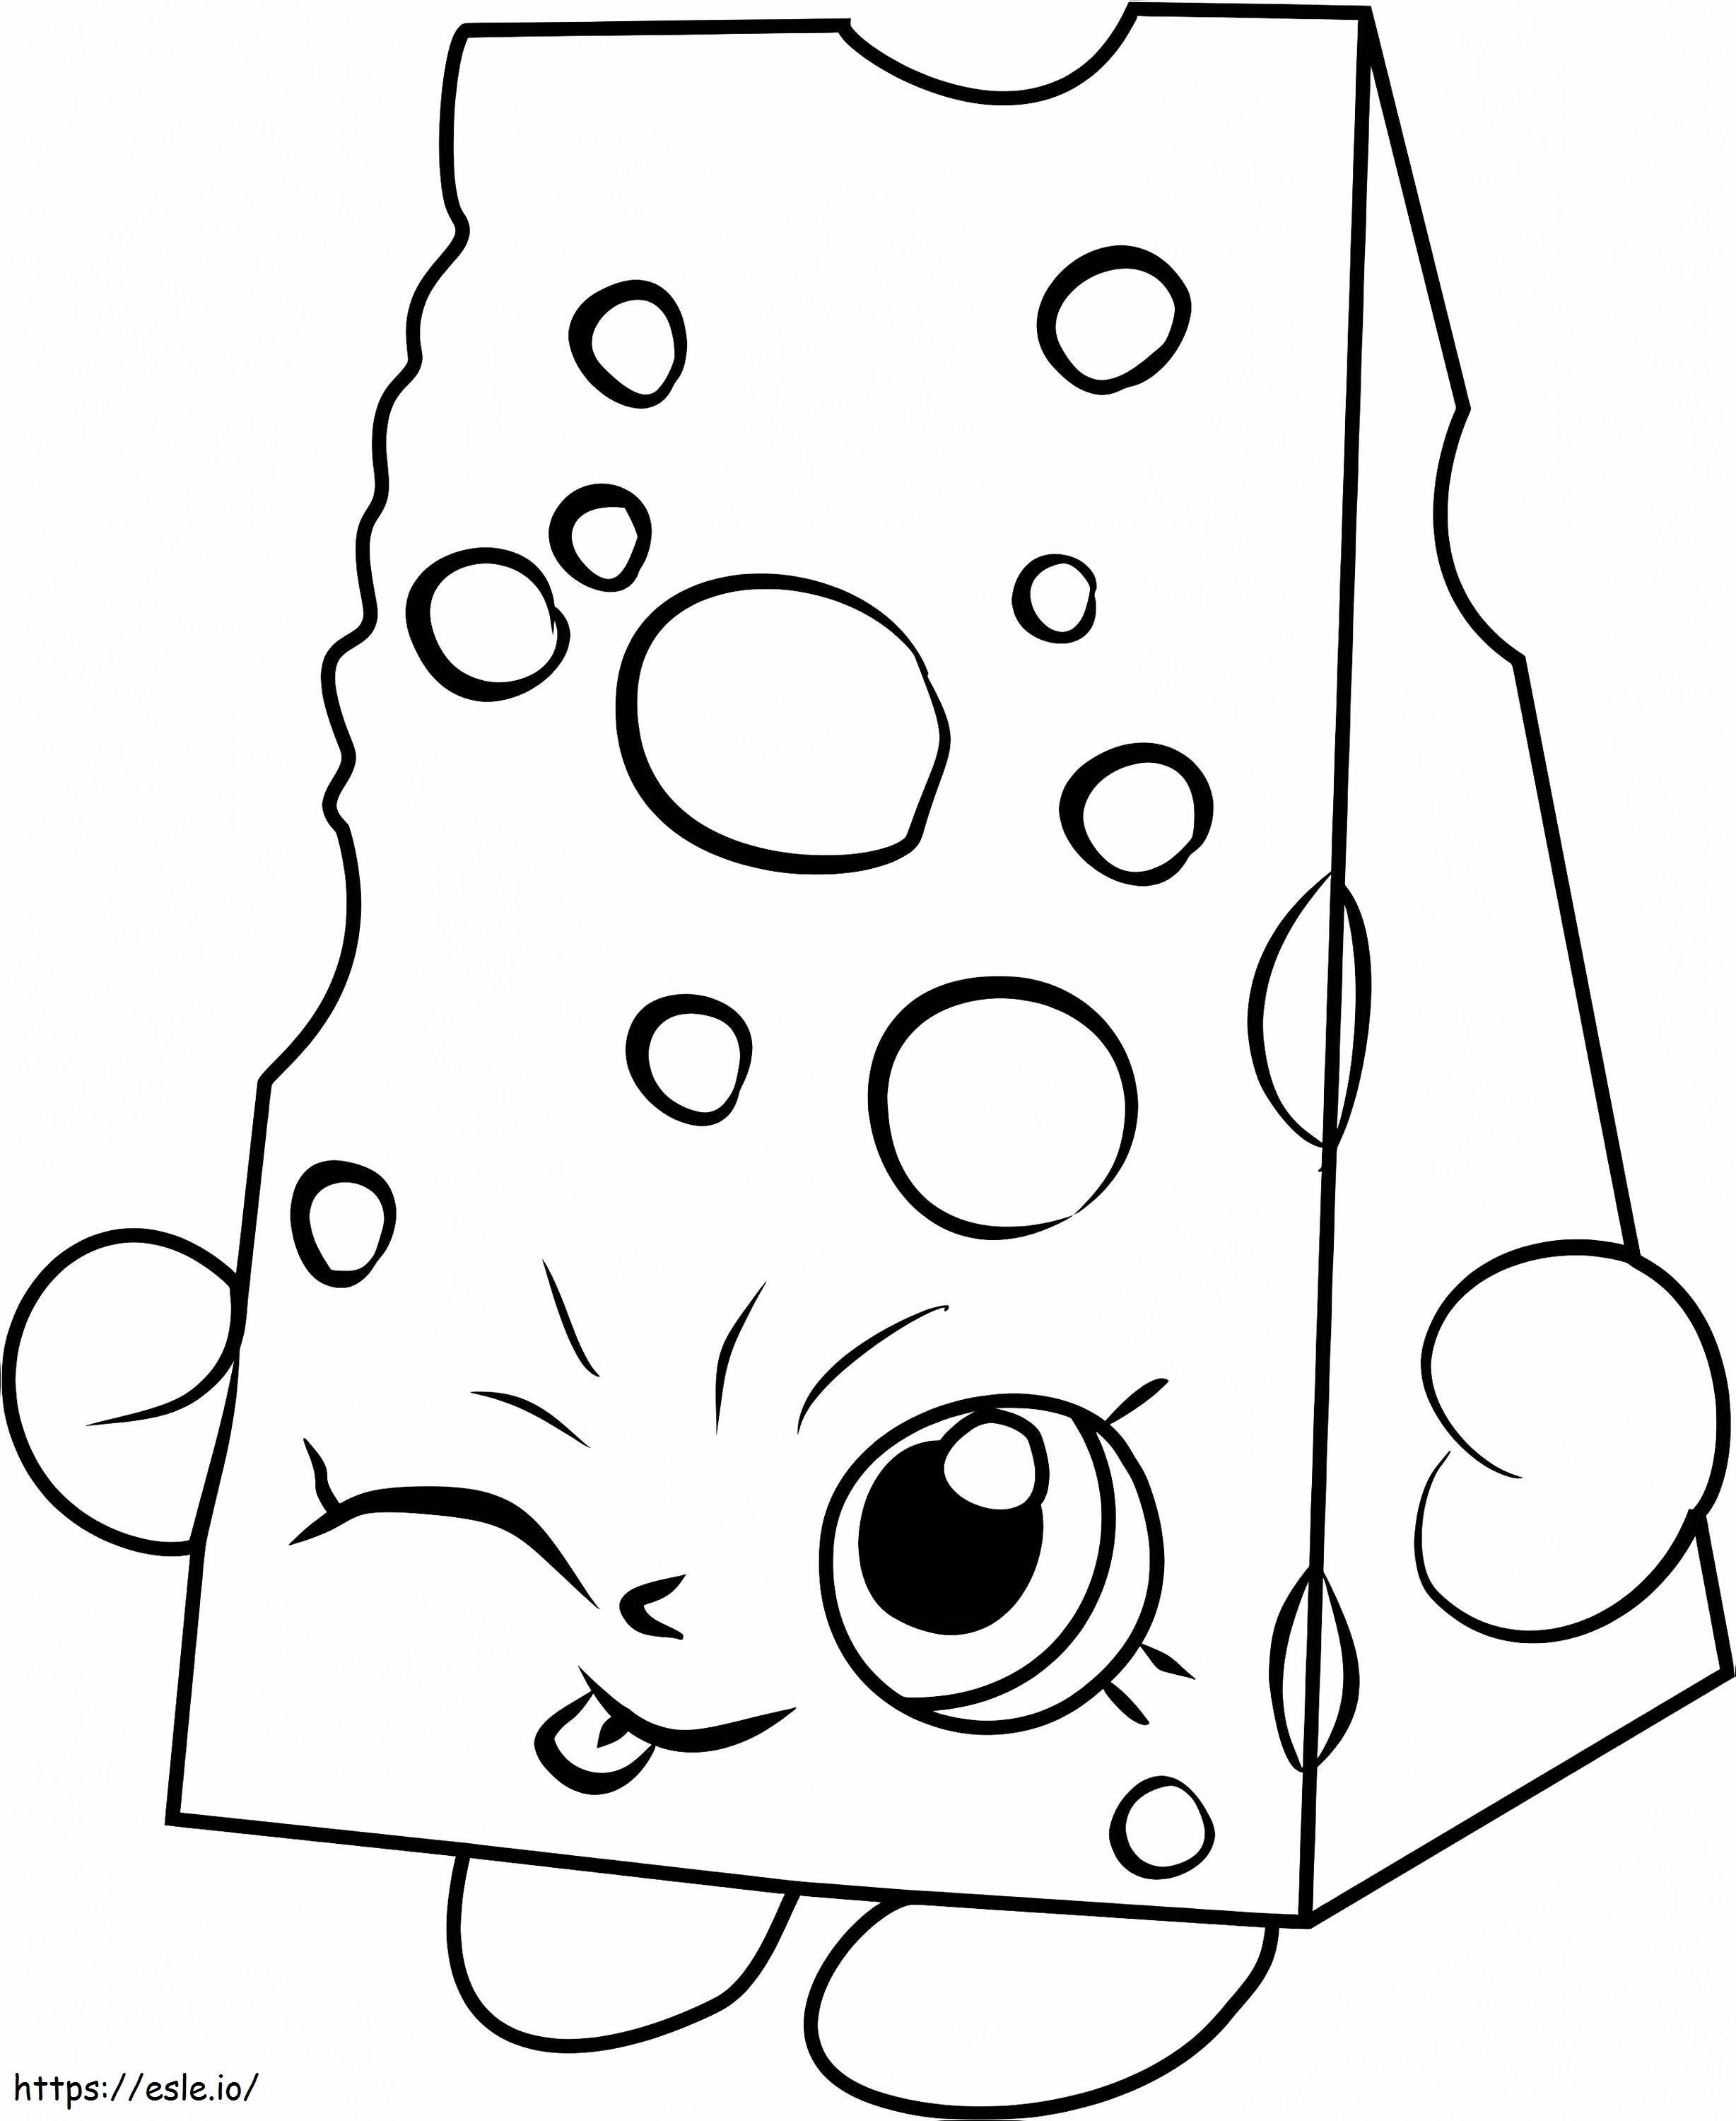 1531274246 Chee Zee Shopkins A4 coloring page